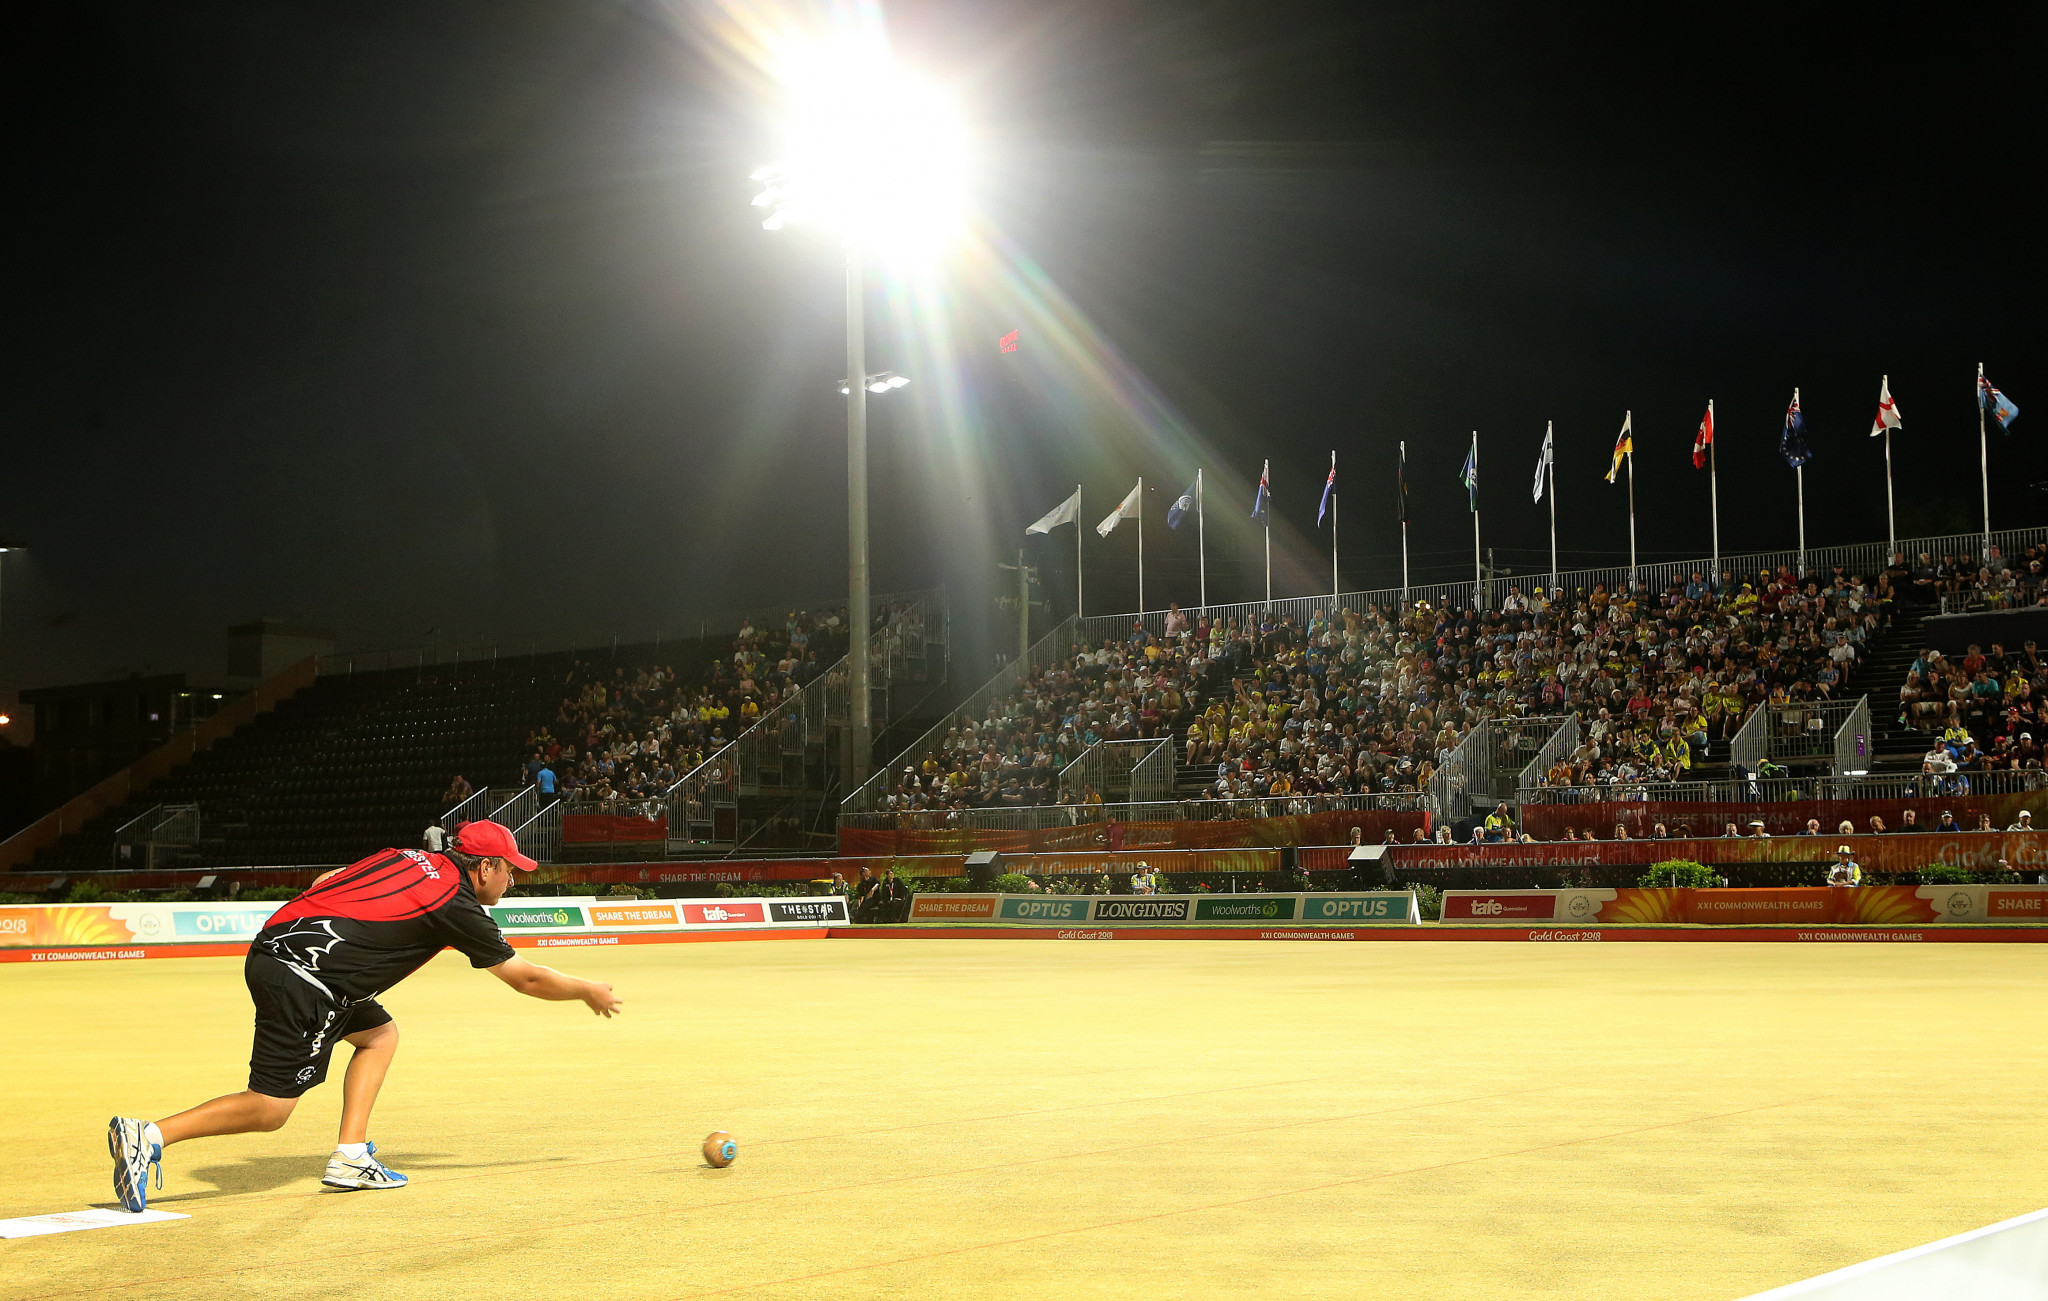 Lawn bowls is among sports no longer compulsory at the Commonwealth Games ©Getty Images